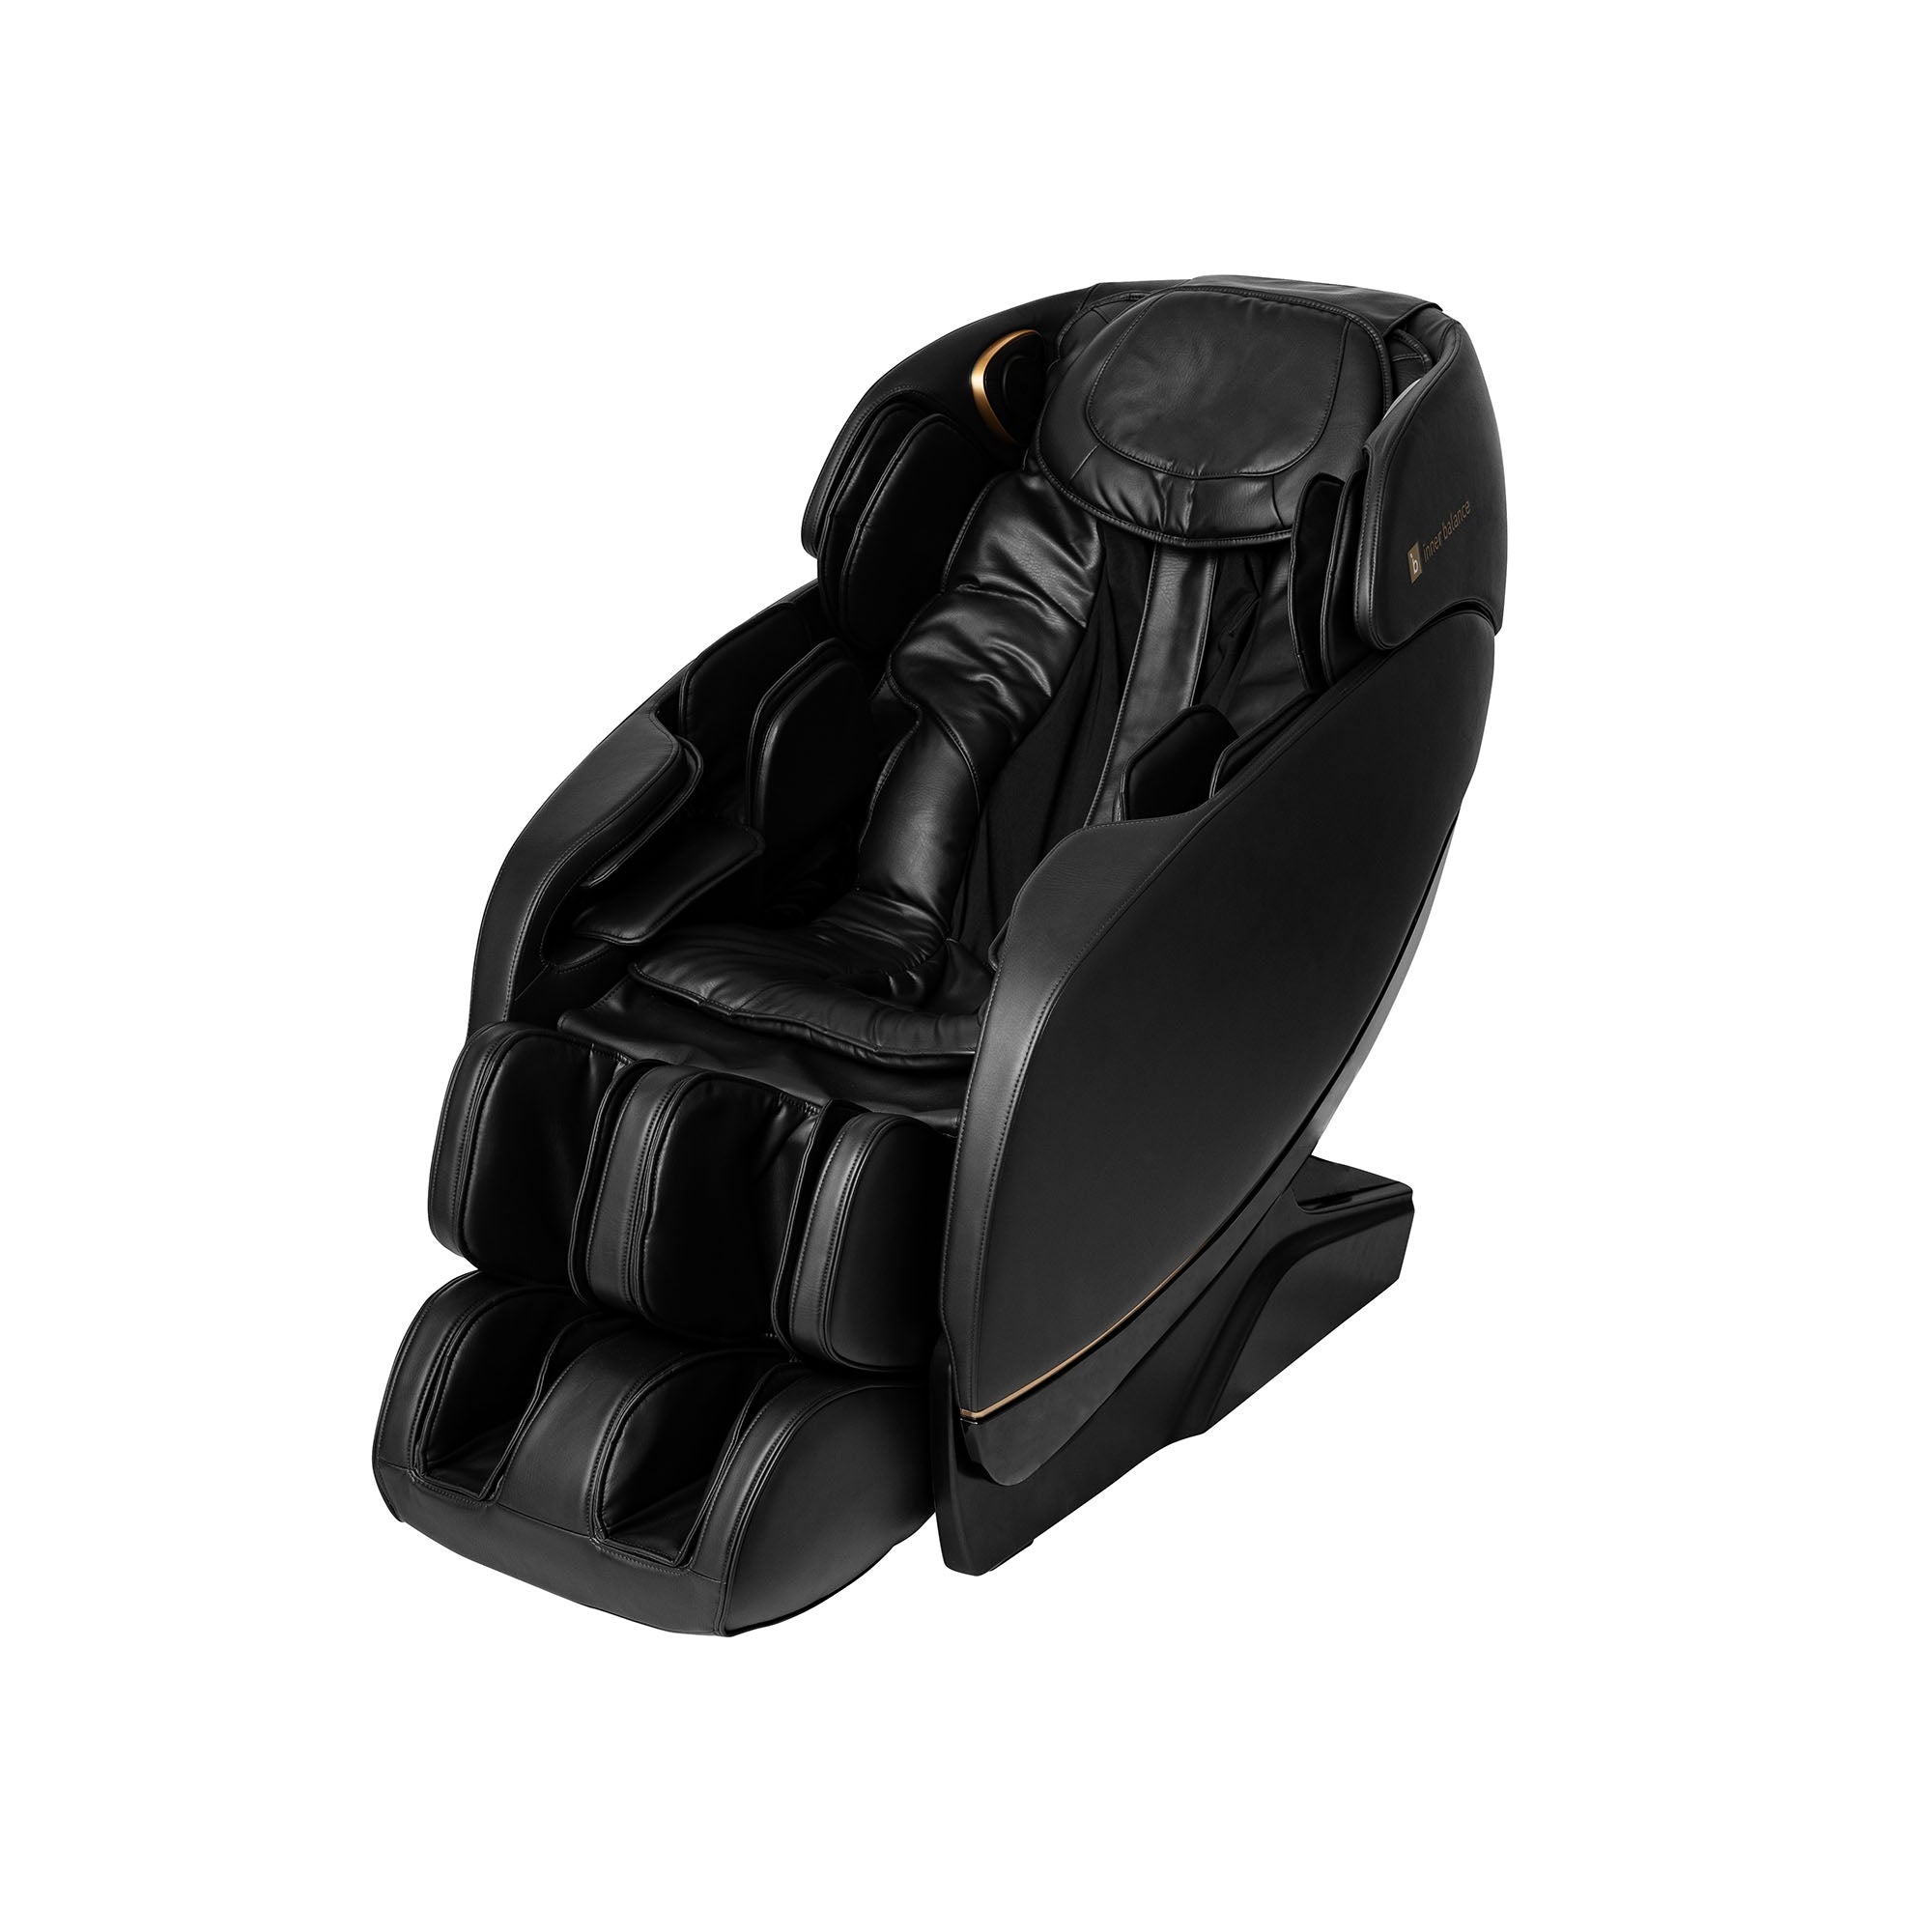 Close-up of the Inner Balance Wellness Jin 2.0 Massage Chair in black